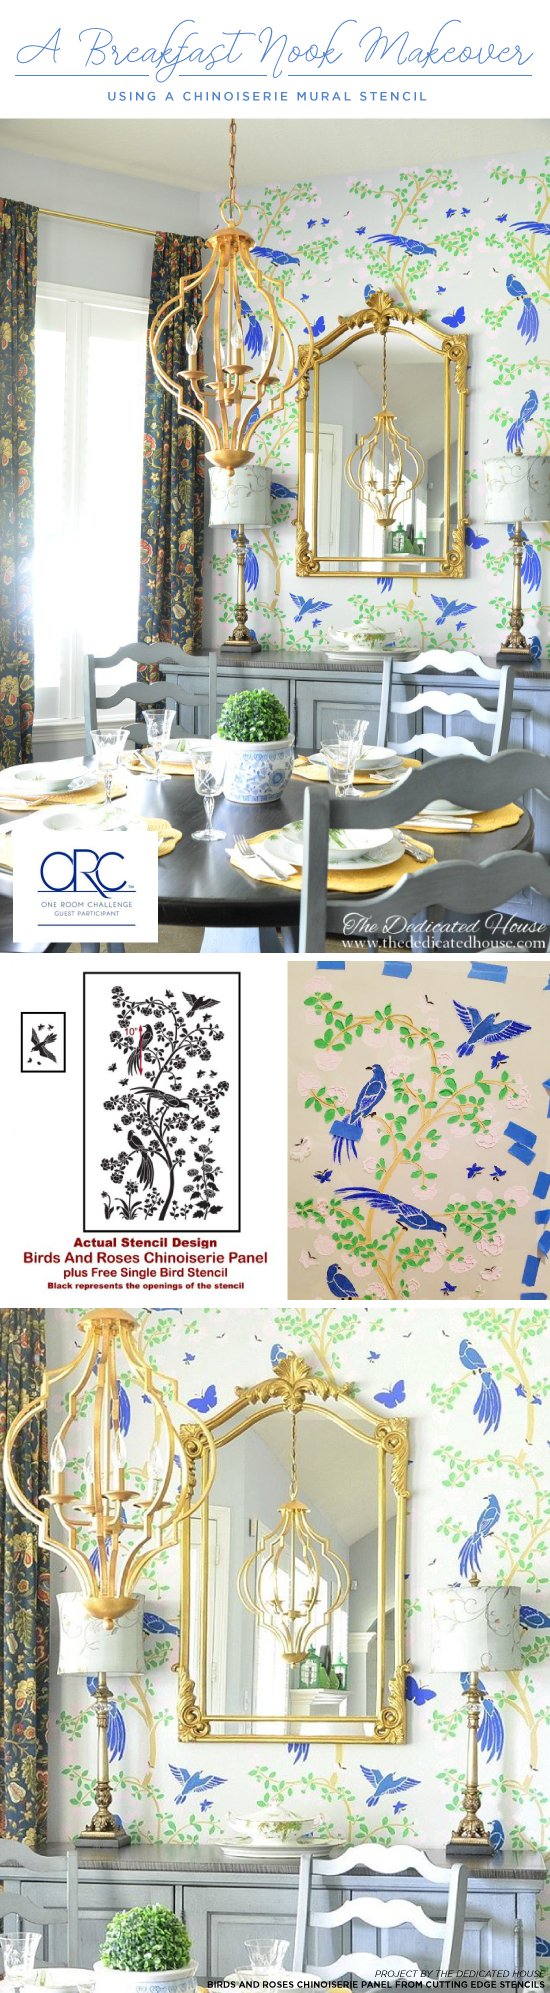 Cutting Edge Stencils shares a DIY stenciled breakfast nook by The Dedicated House that used the Chinoiserie Birds and Roses Mural Stencil. http://www.cuttingedgestencils.com/chinoiserie-wall-stencil-mural-panel-asian-design.html